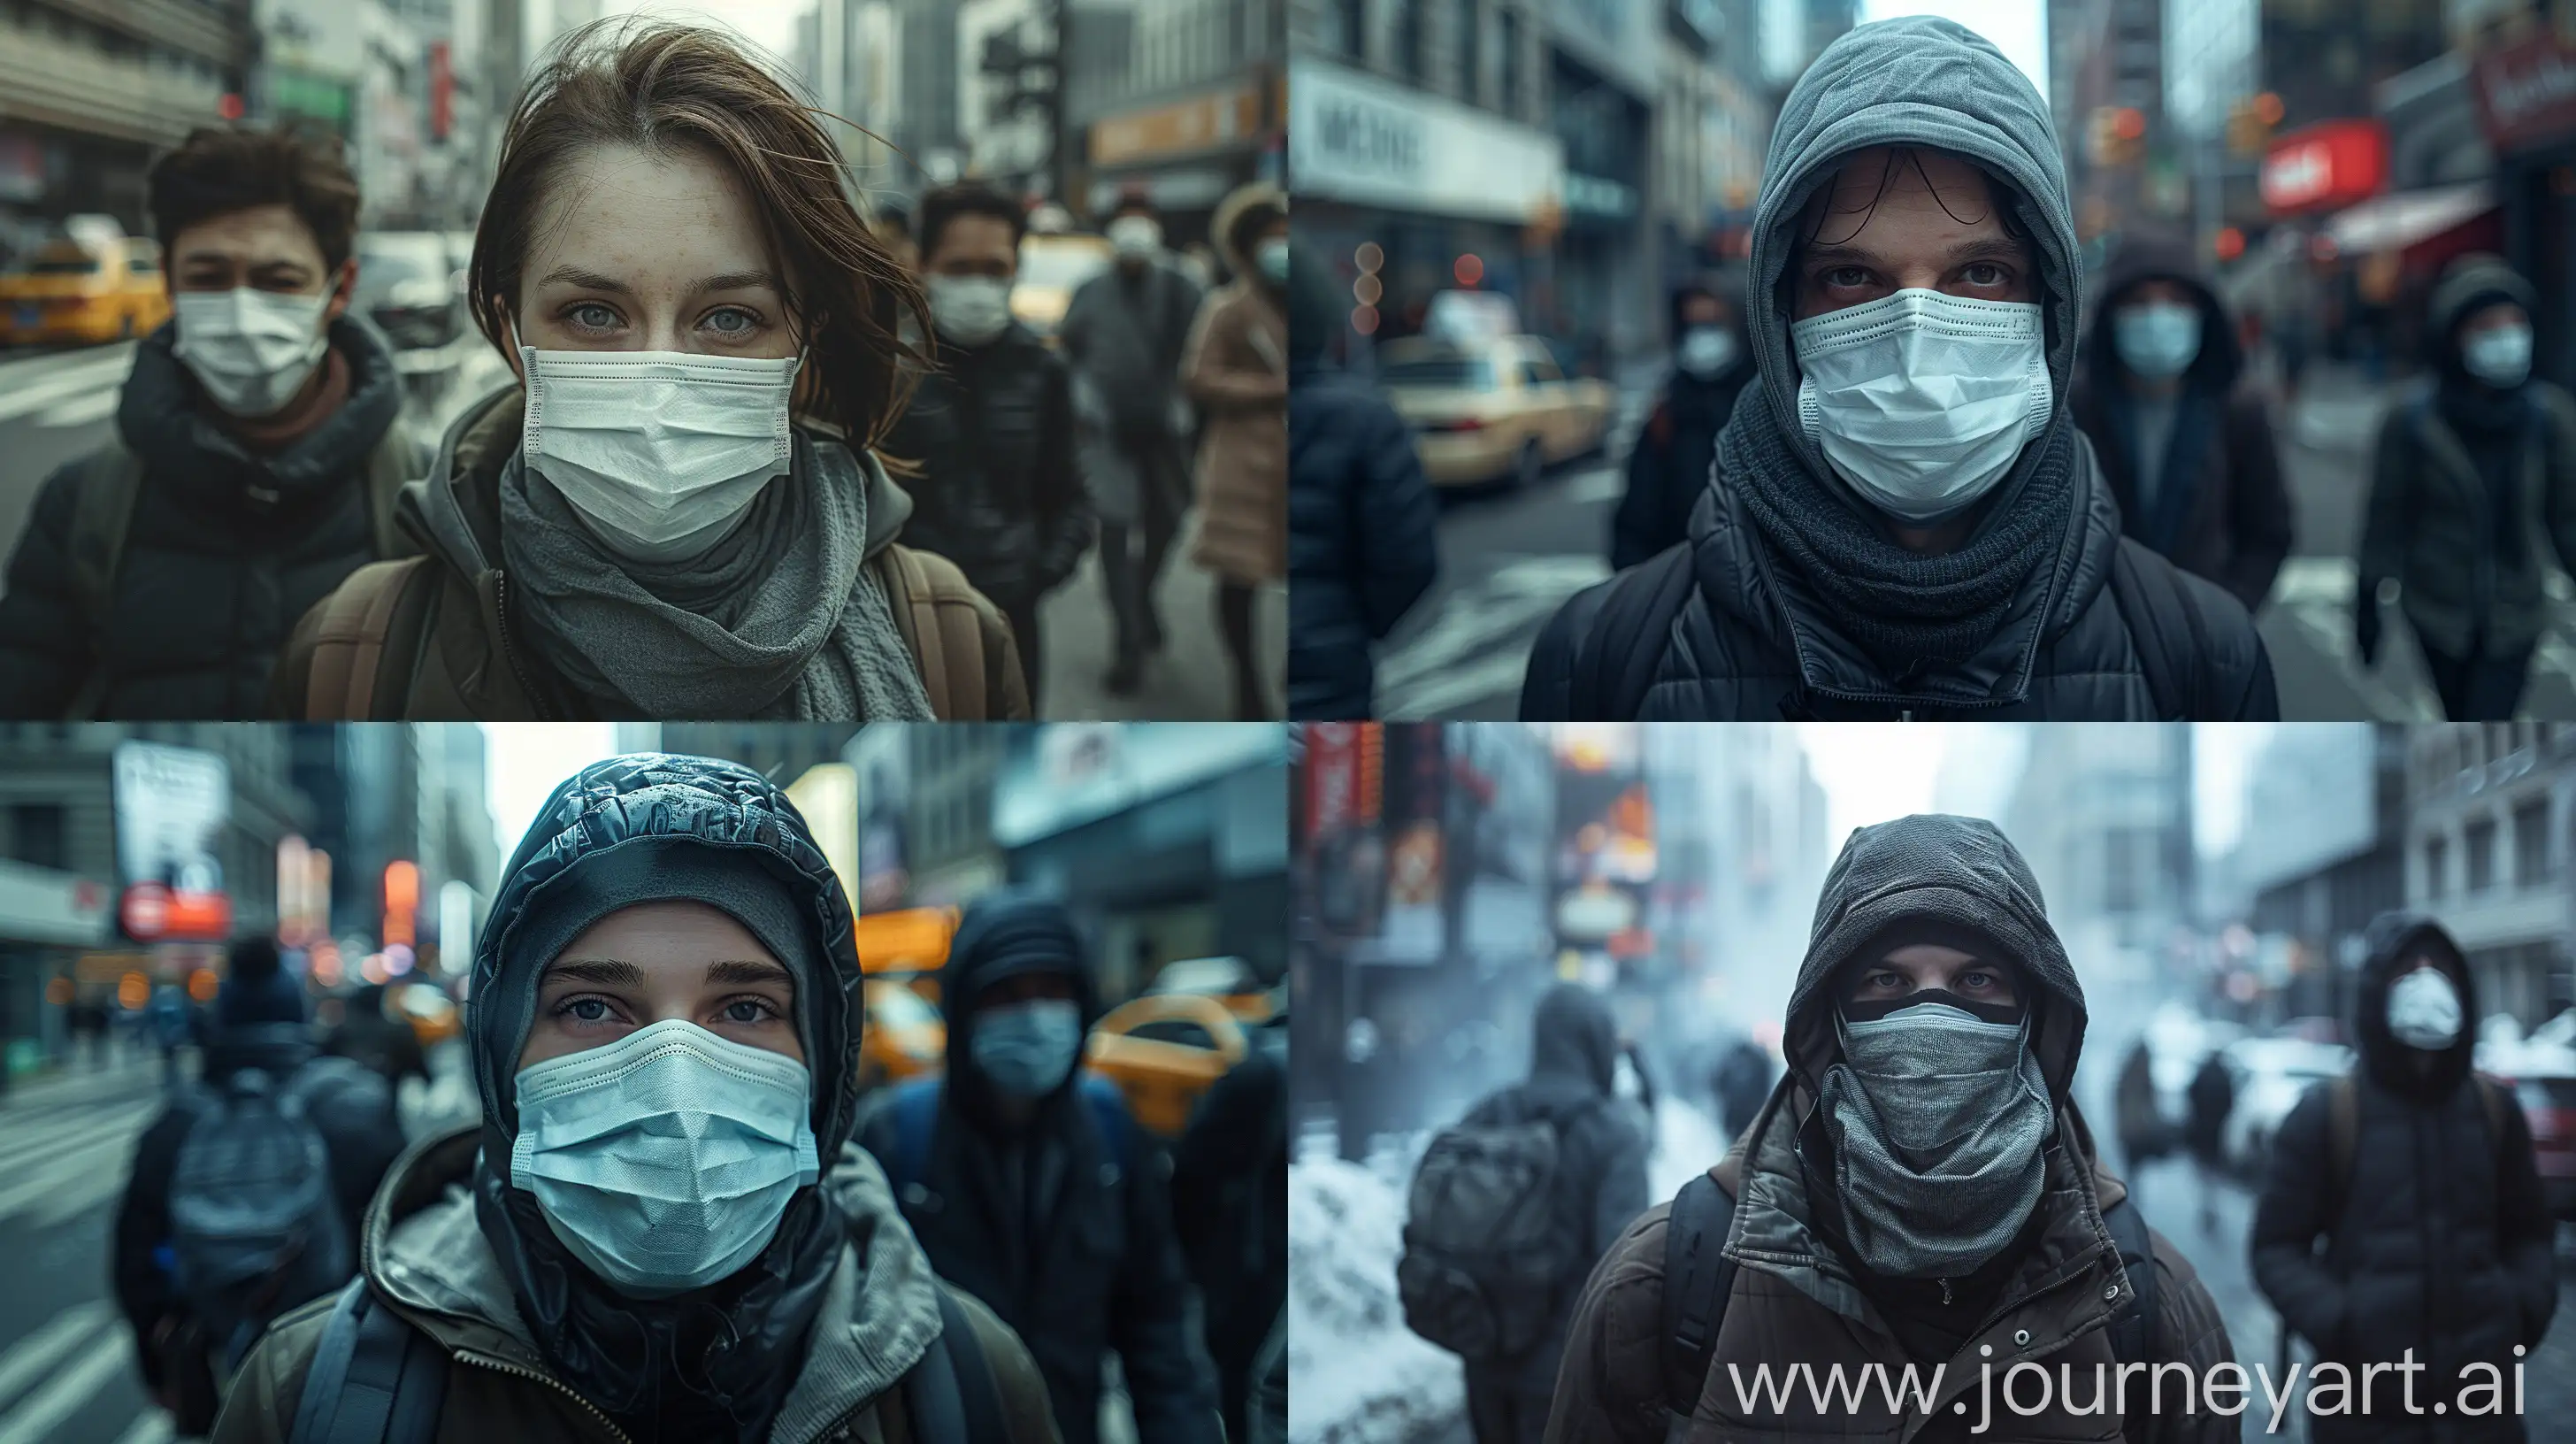 Desolate-City-Streets-During-Pandemic-Cinematic-Dystopian-Scene-with-Masked-People